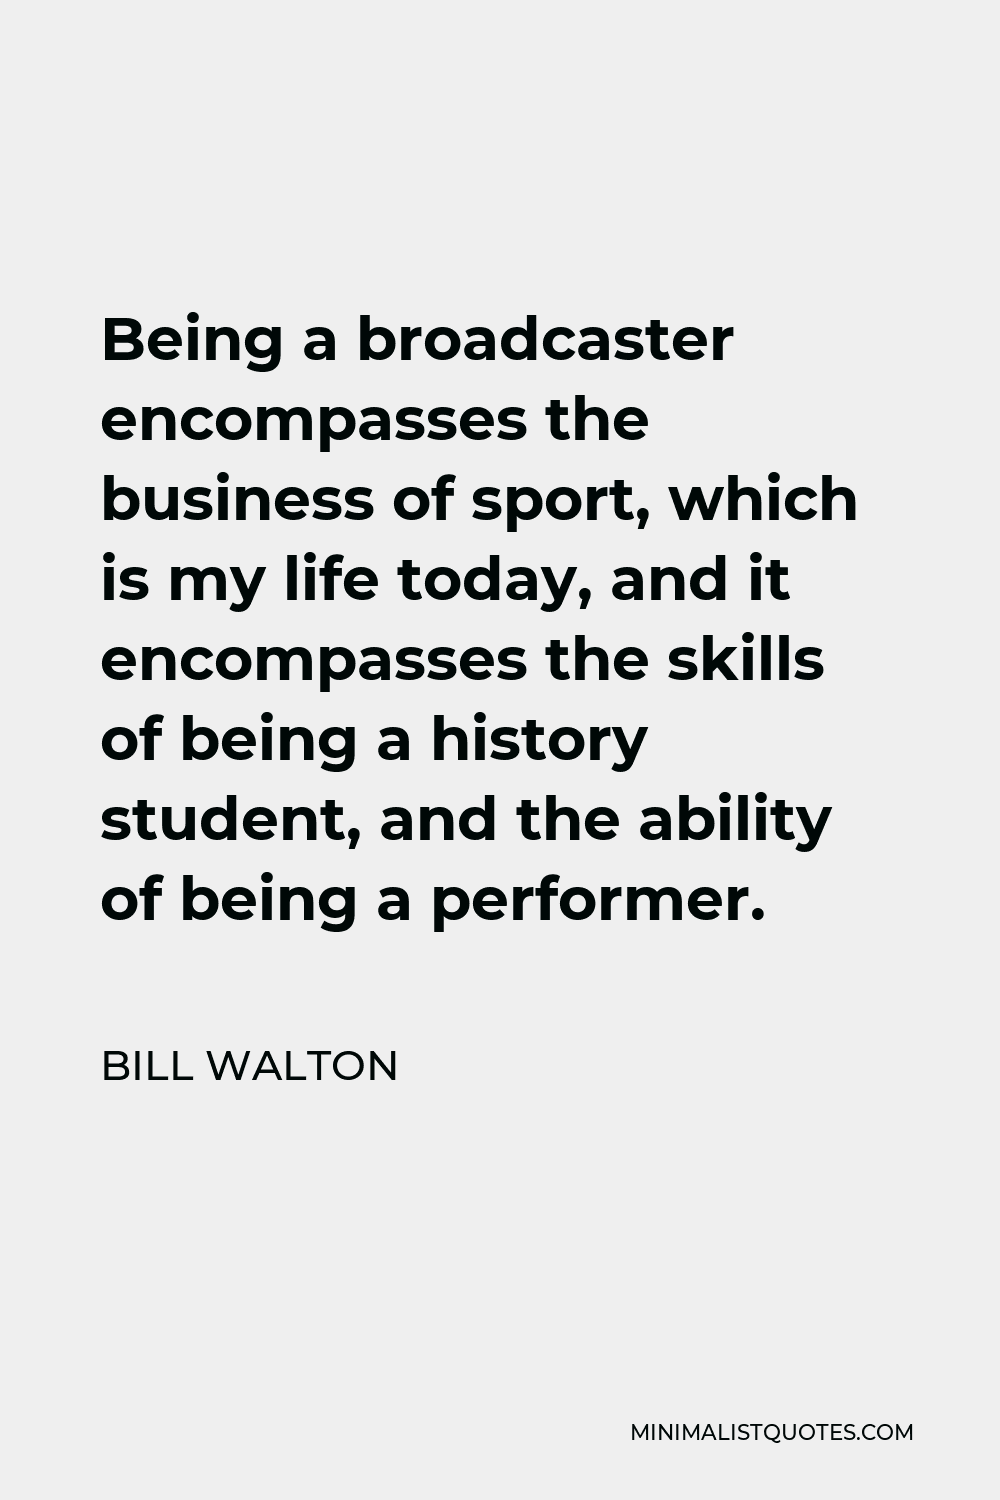 Bill Walton Quote - Being a broadcaster encompasses the business of sport, which is my life today, and it encompasses the skills of being a history student, and the ability of being a performer.